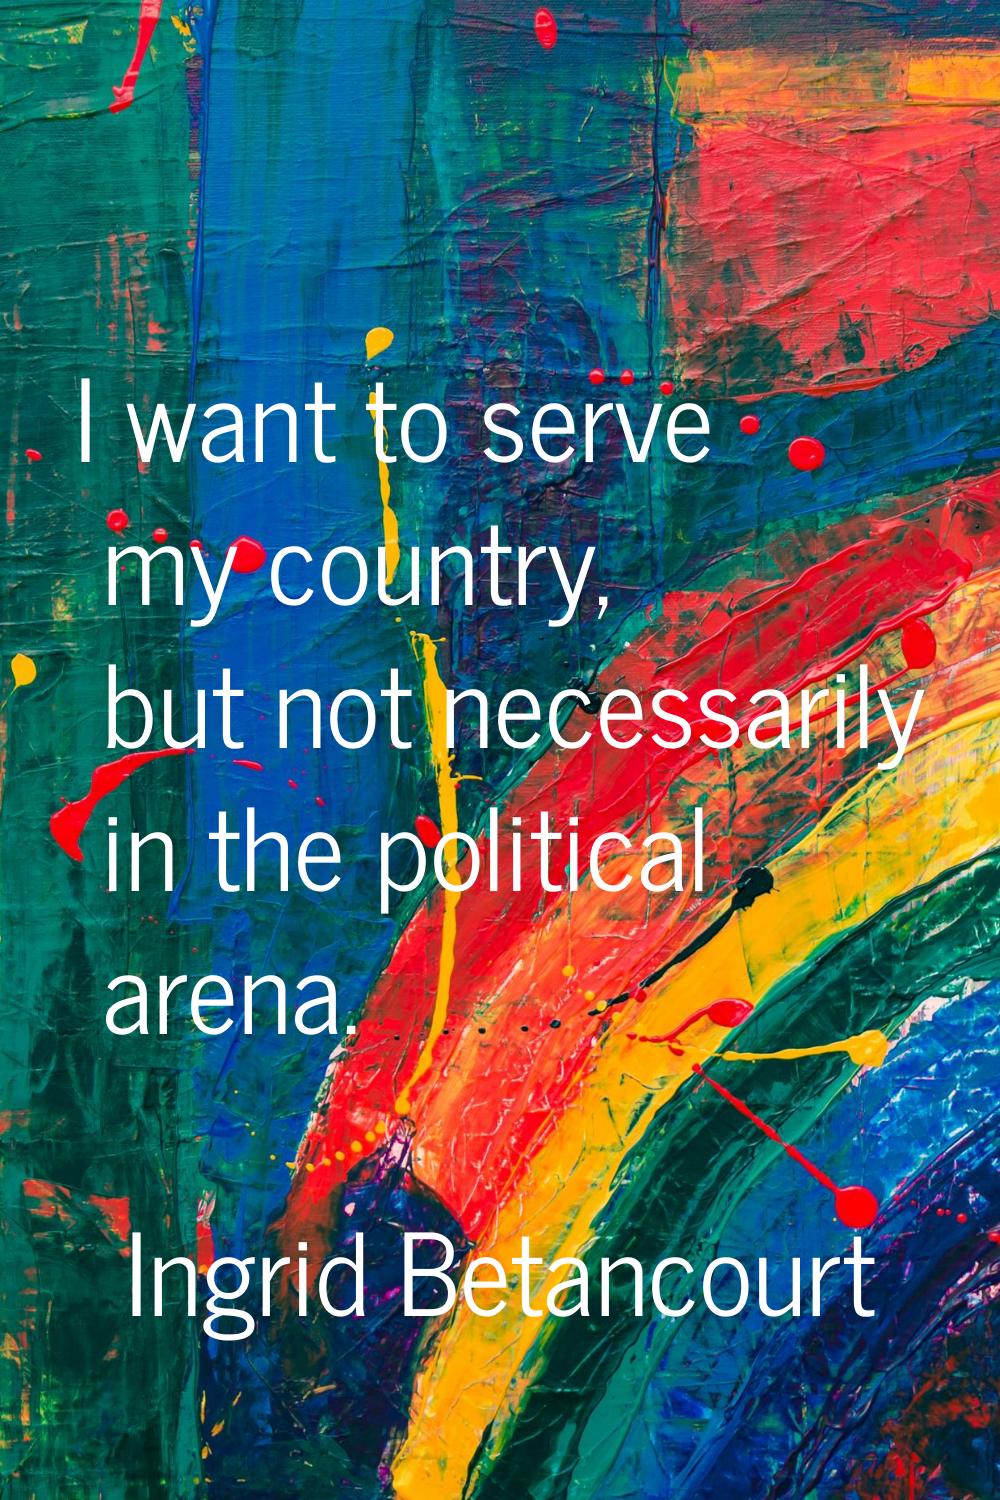 I want to serve my country, but not necessarily in the political arena.